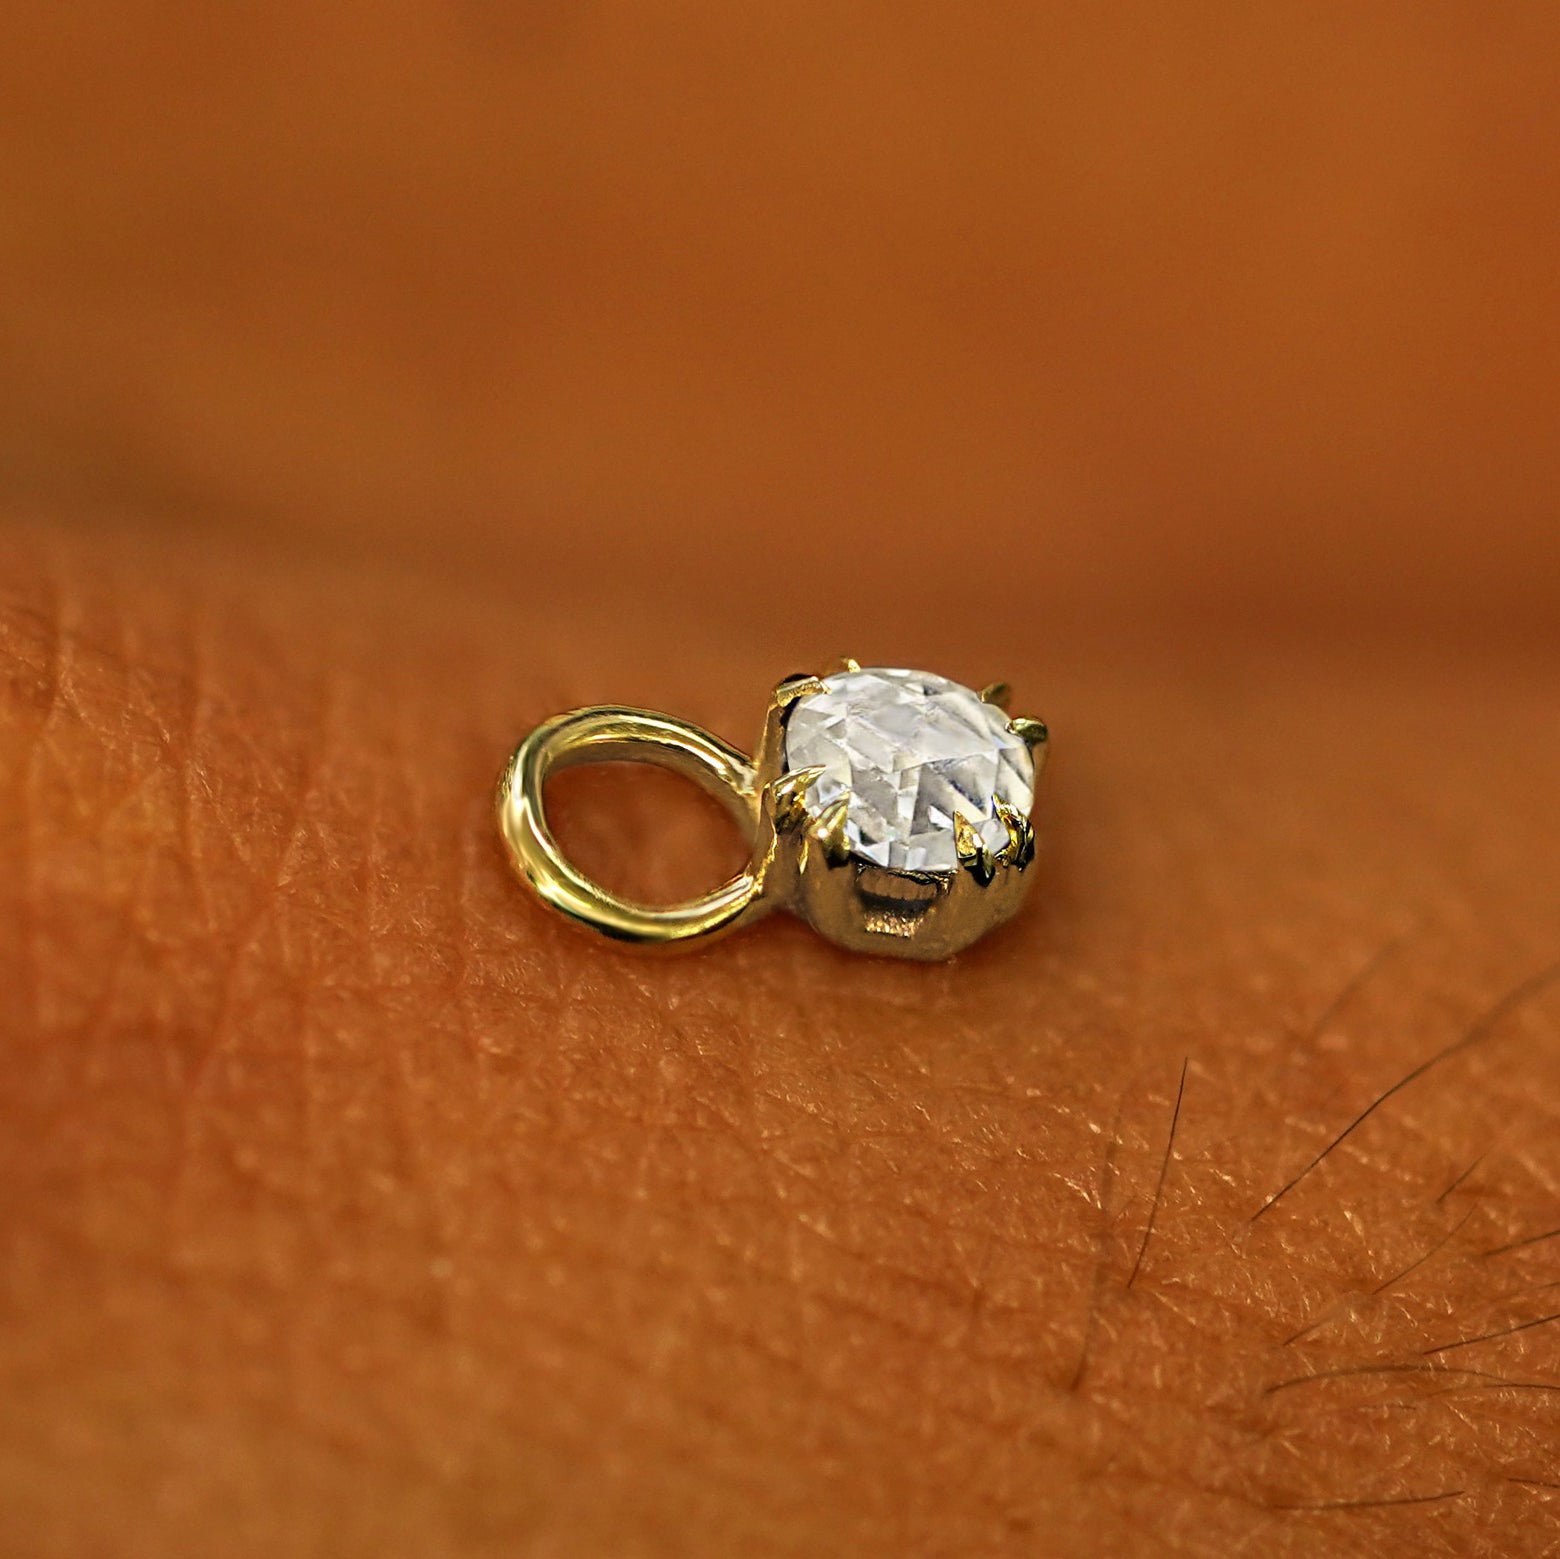 A solid yellow gold Rose Cut Diamond Charm for earring resting on the back of a model's hand